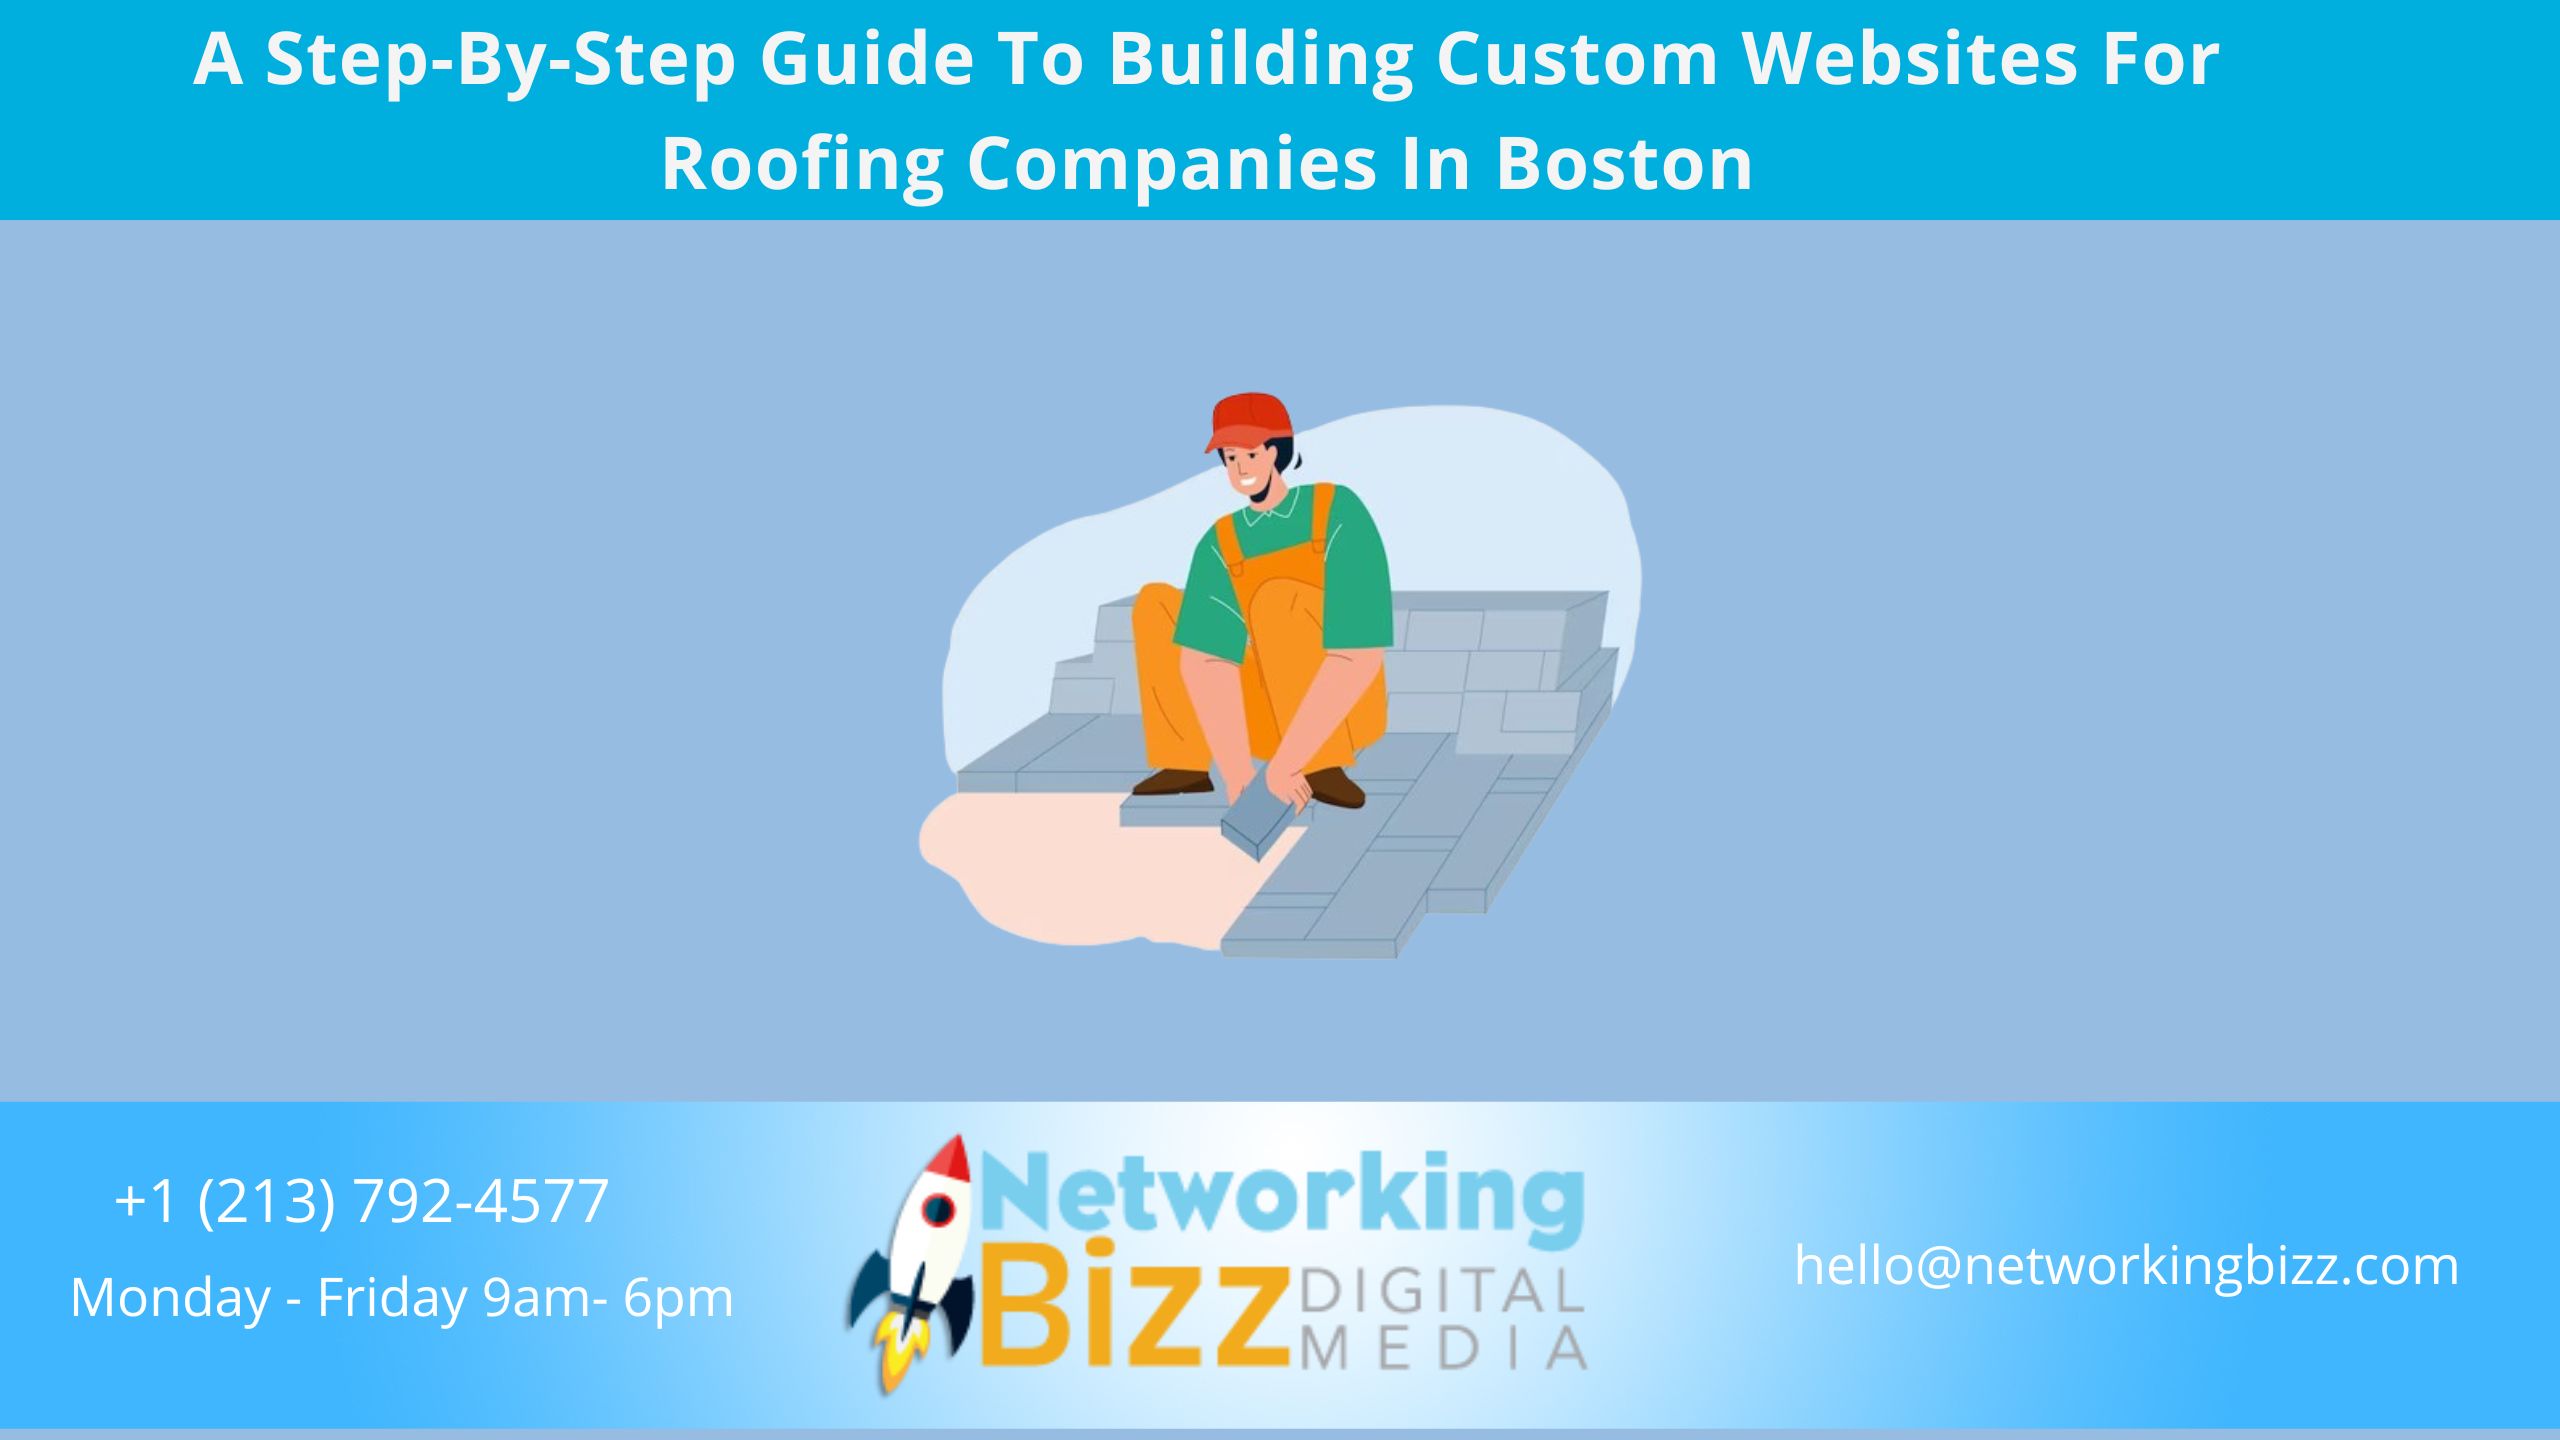 A Step-By-Step Guide To Building Custom Websites For Roofing Companies In Boston